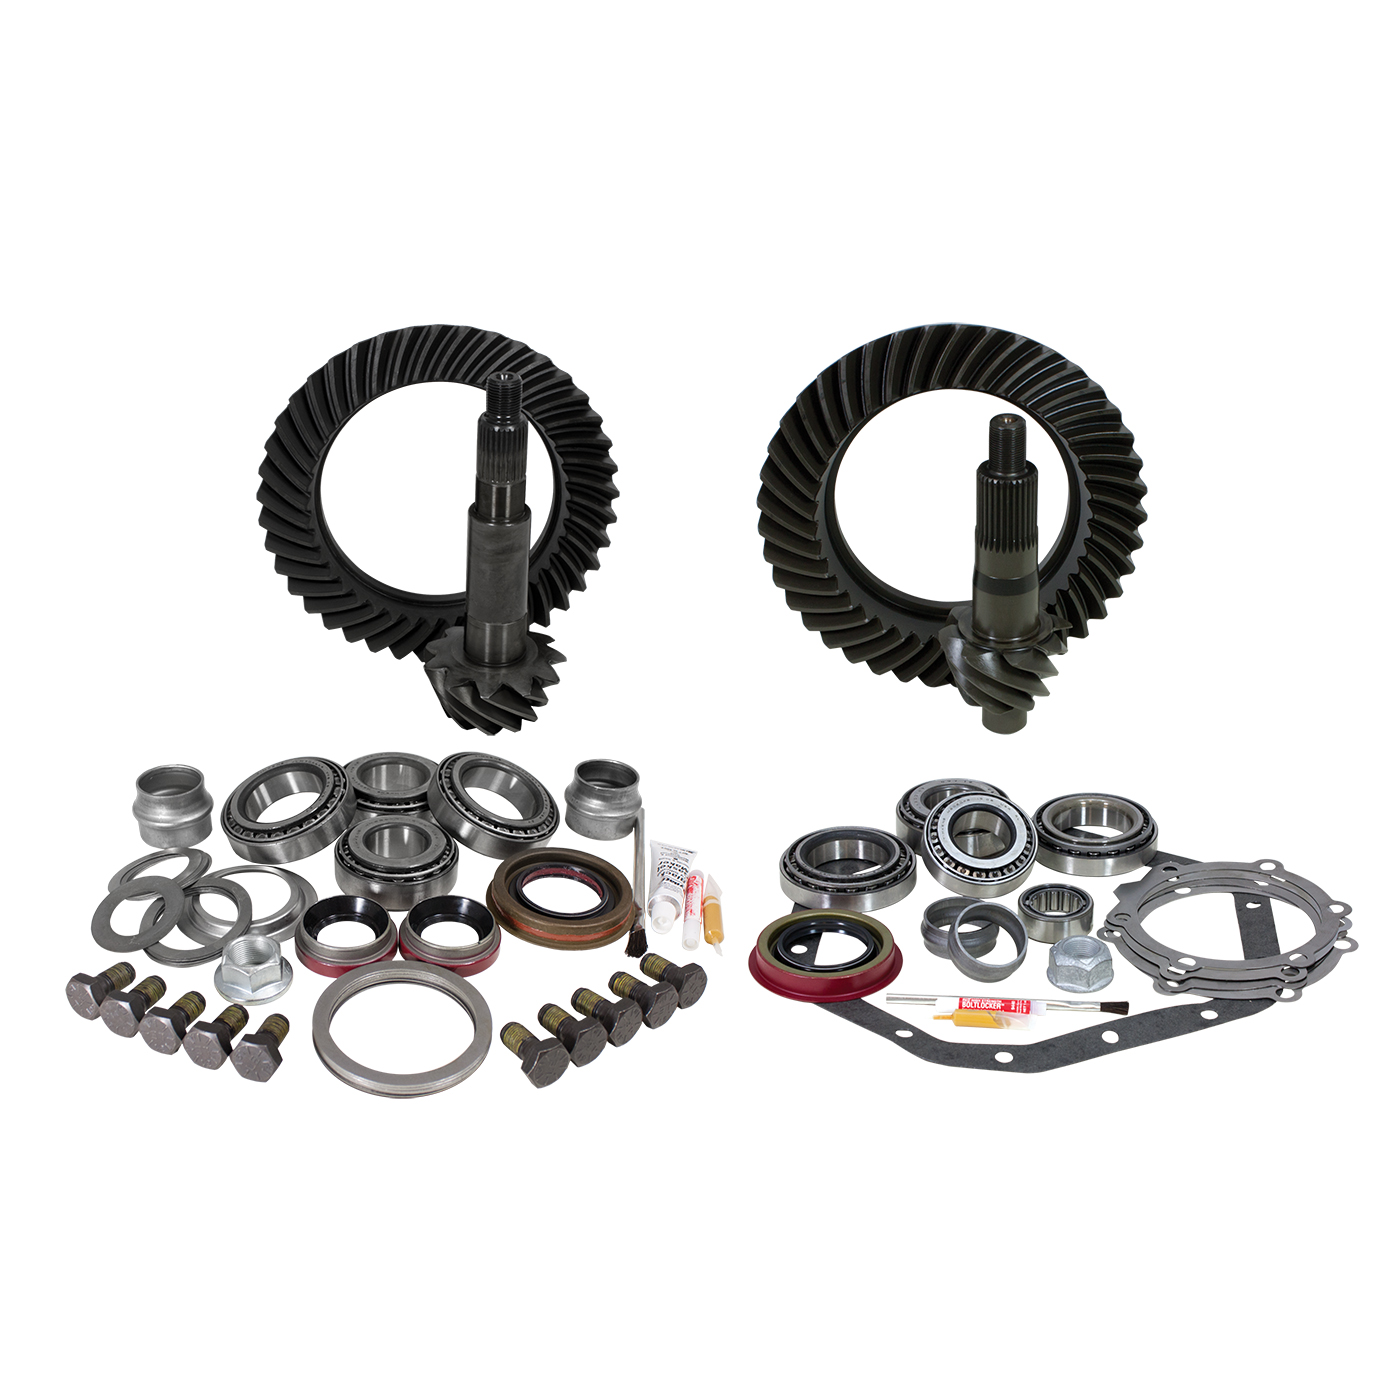 Picture of Yukon Gear & Axle YGK053 Yukon Gear & Install Kit Pkg For Rev Rotation D60 & ’99 & Up Gm 14t, 5.38 Thick.